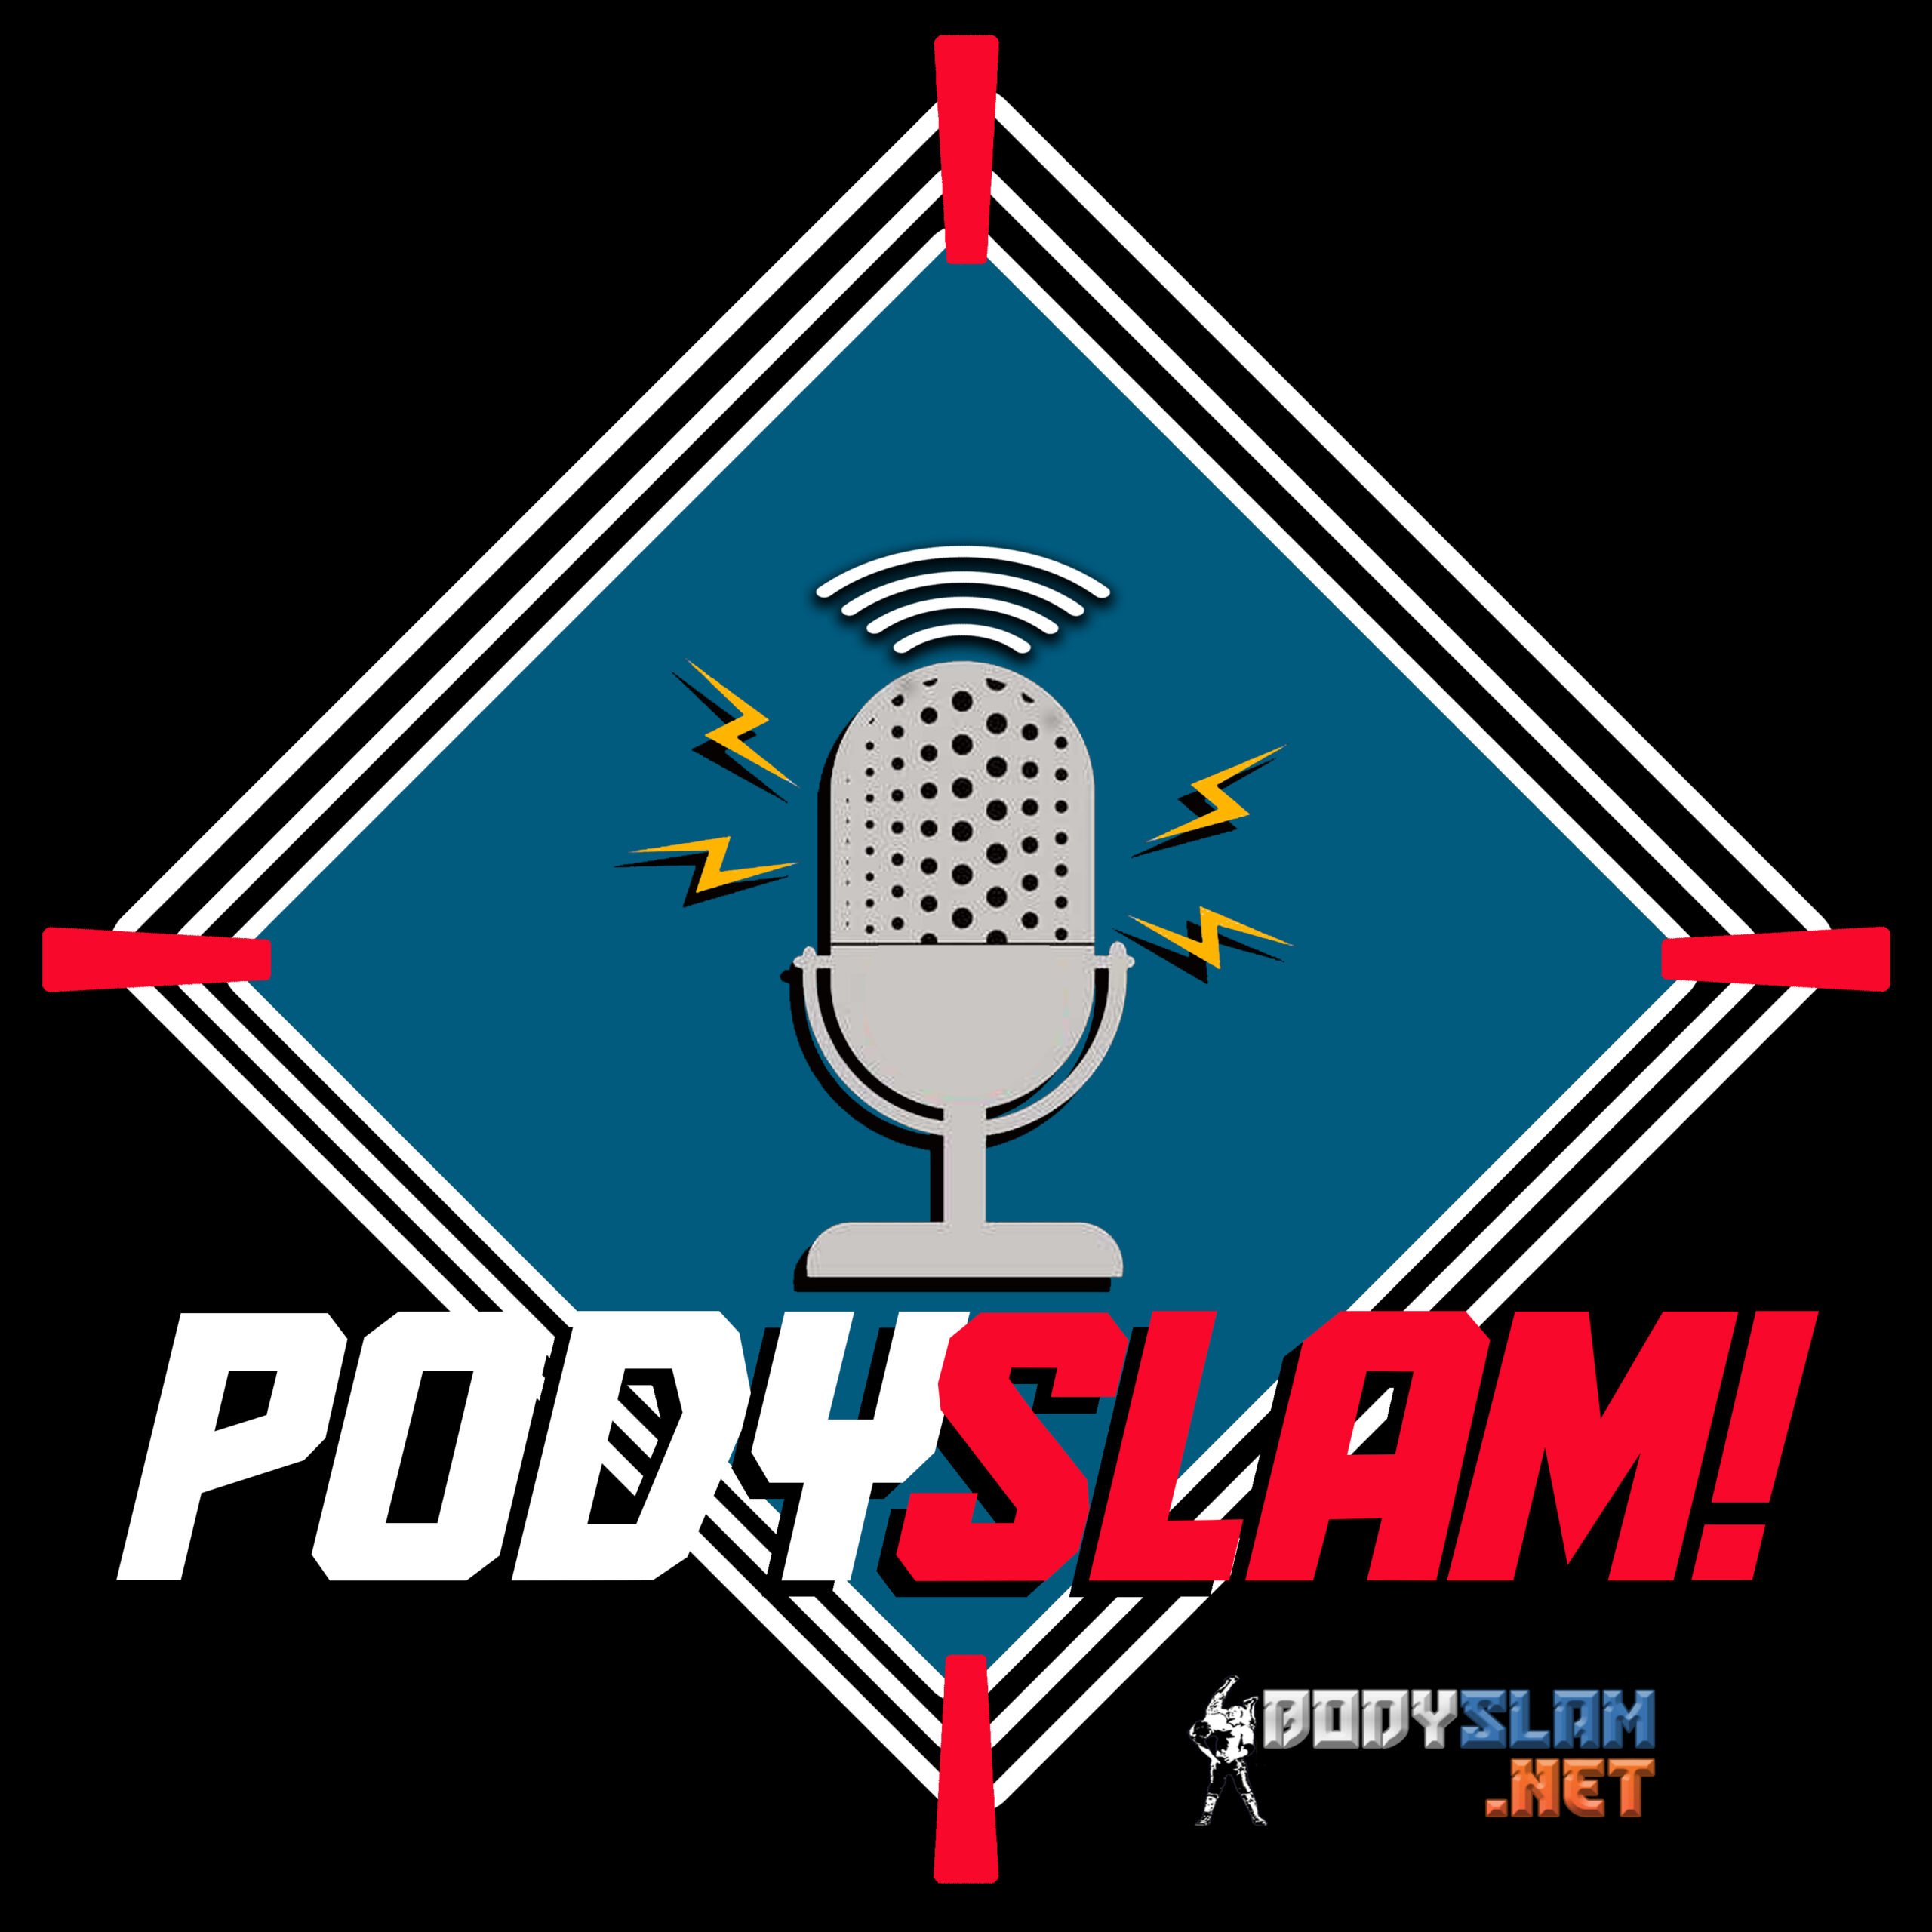 Check Out The Debut Of Bodyslam.net’s Newest Podcast PODYSLAM! Hosted By Cassidy Haynes And Lemaire Lee!